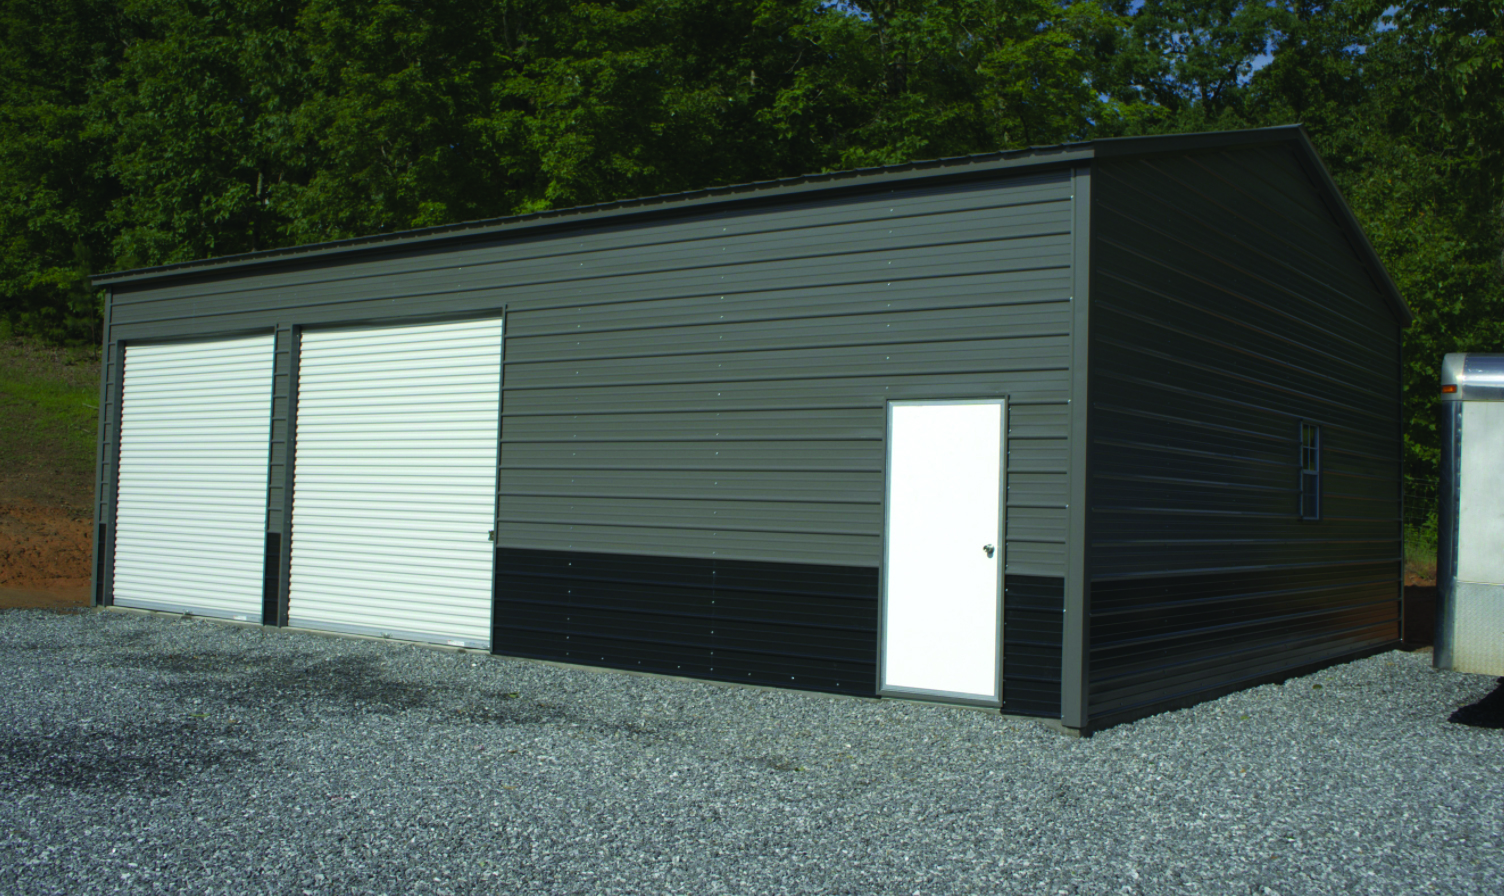 CHOICE TRIPLE GARAGE, 2 BAY 1 ENTRY  *PHOTO REPRESENTATION IS AN EXAMPLE ONLY / ACTUAL PRODUCT MAY VARY